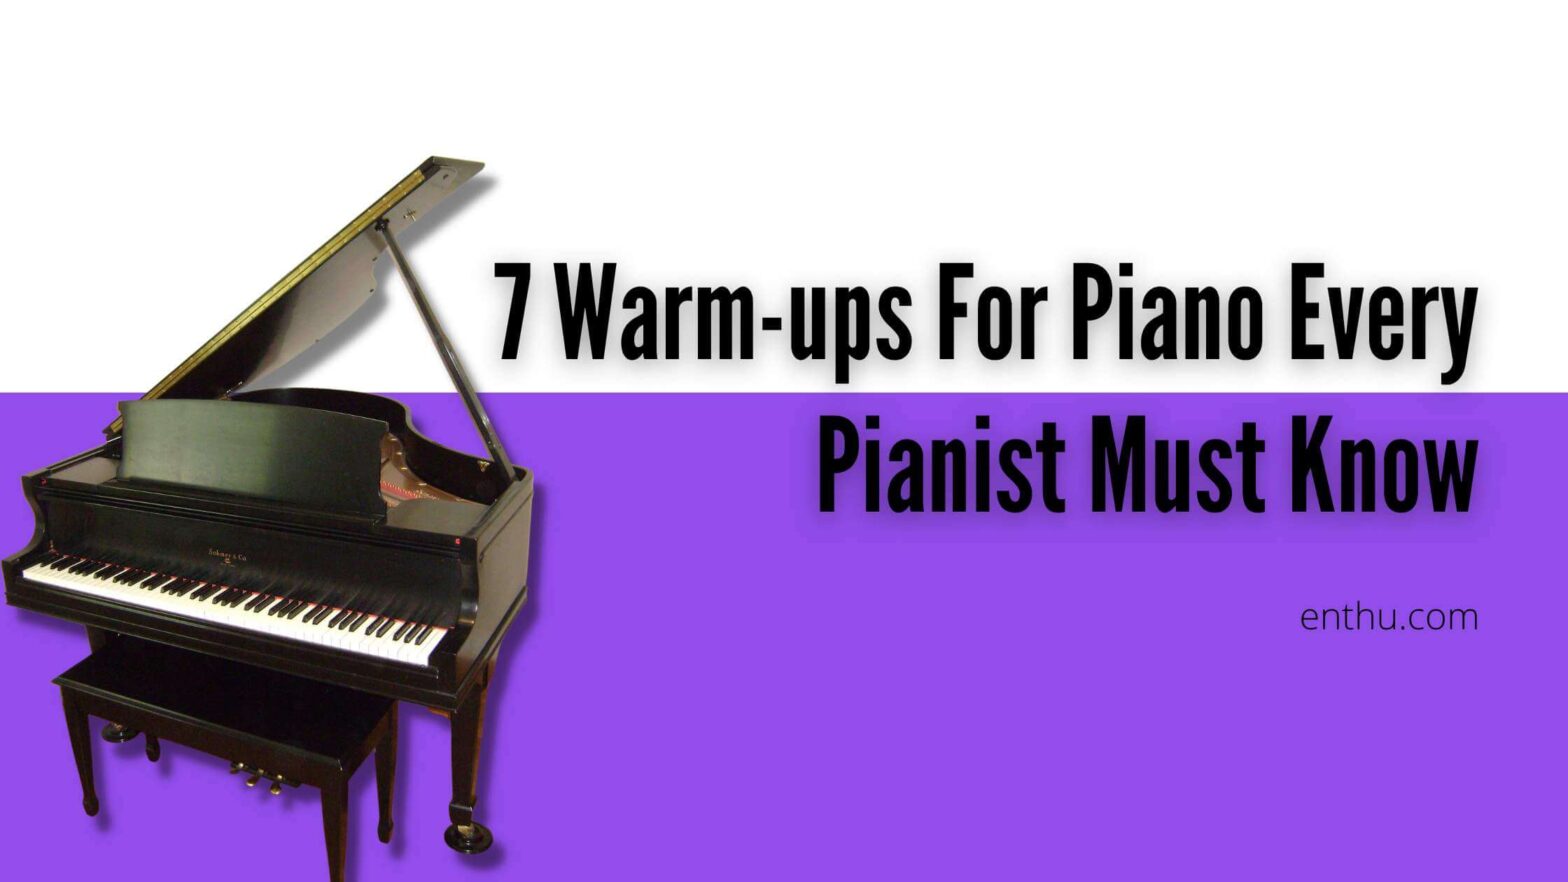 warm-ups for piano